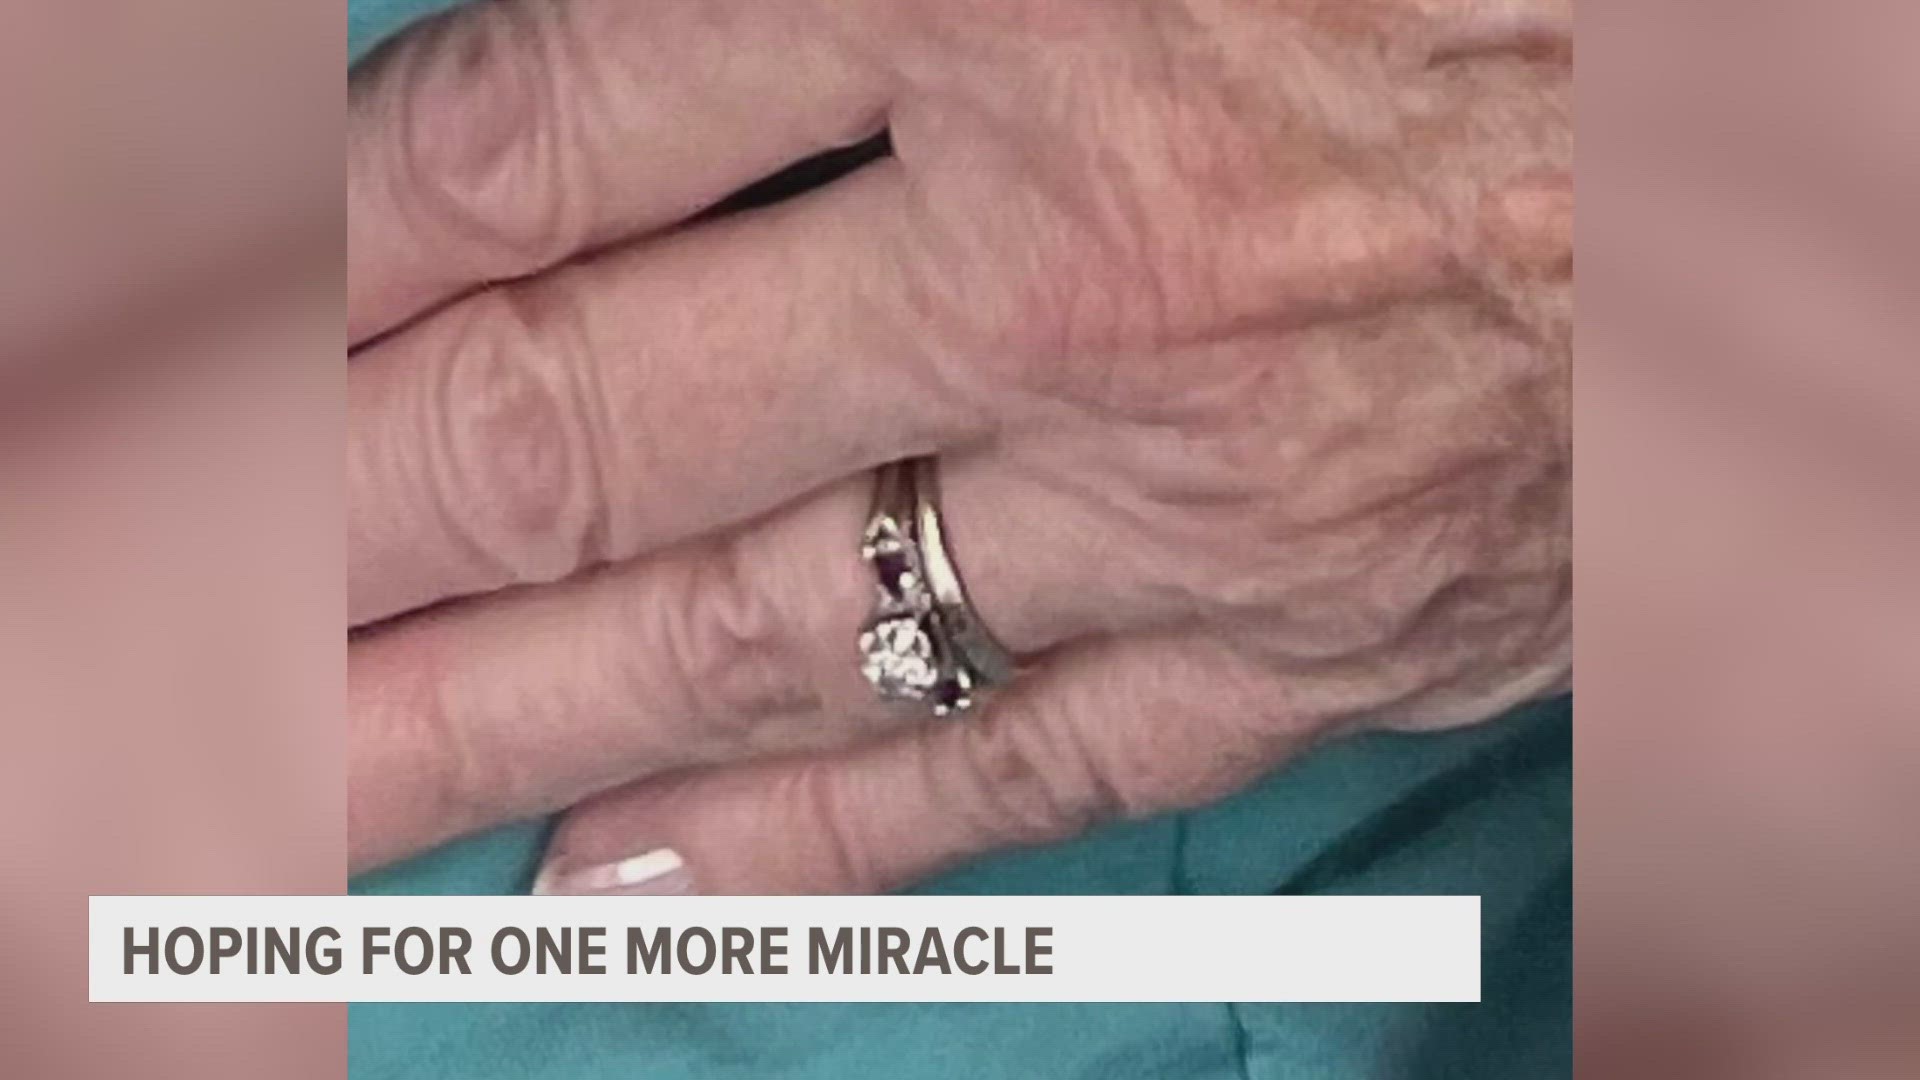 Woman who mordaciously survived car crash is now searching for two lost rings.